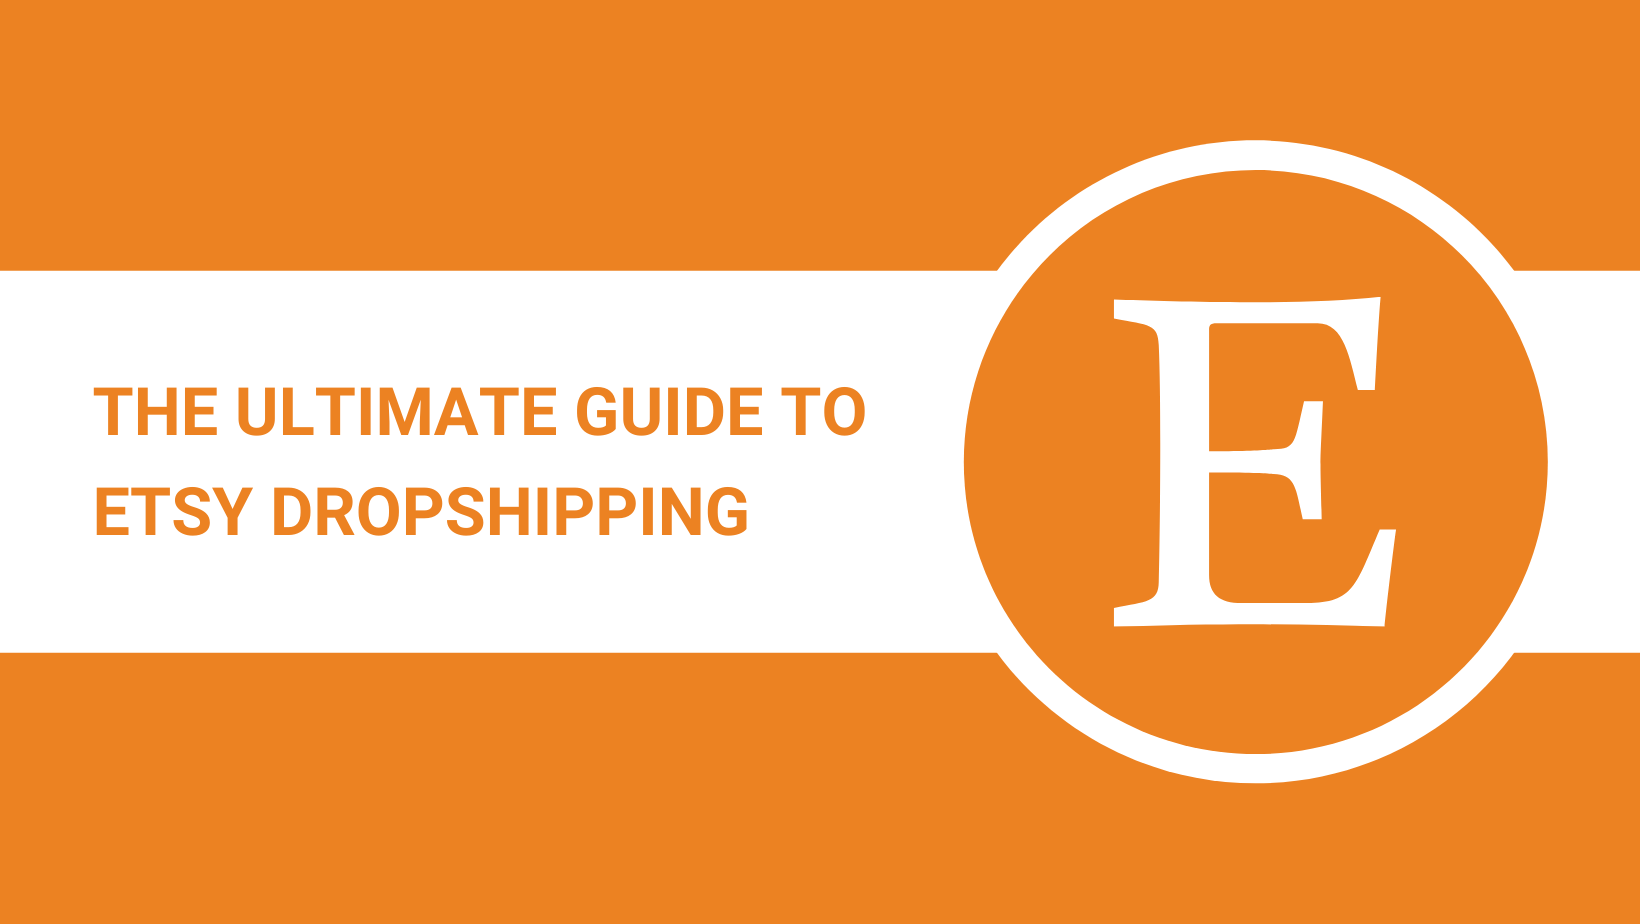 THE ULTIMATE GUIDE TO ETSY DROPSHIPPING